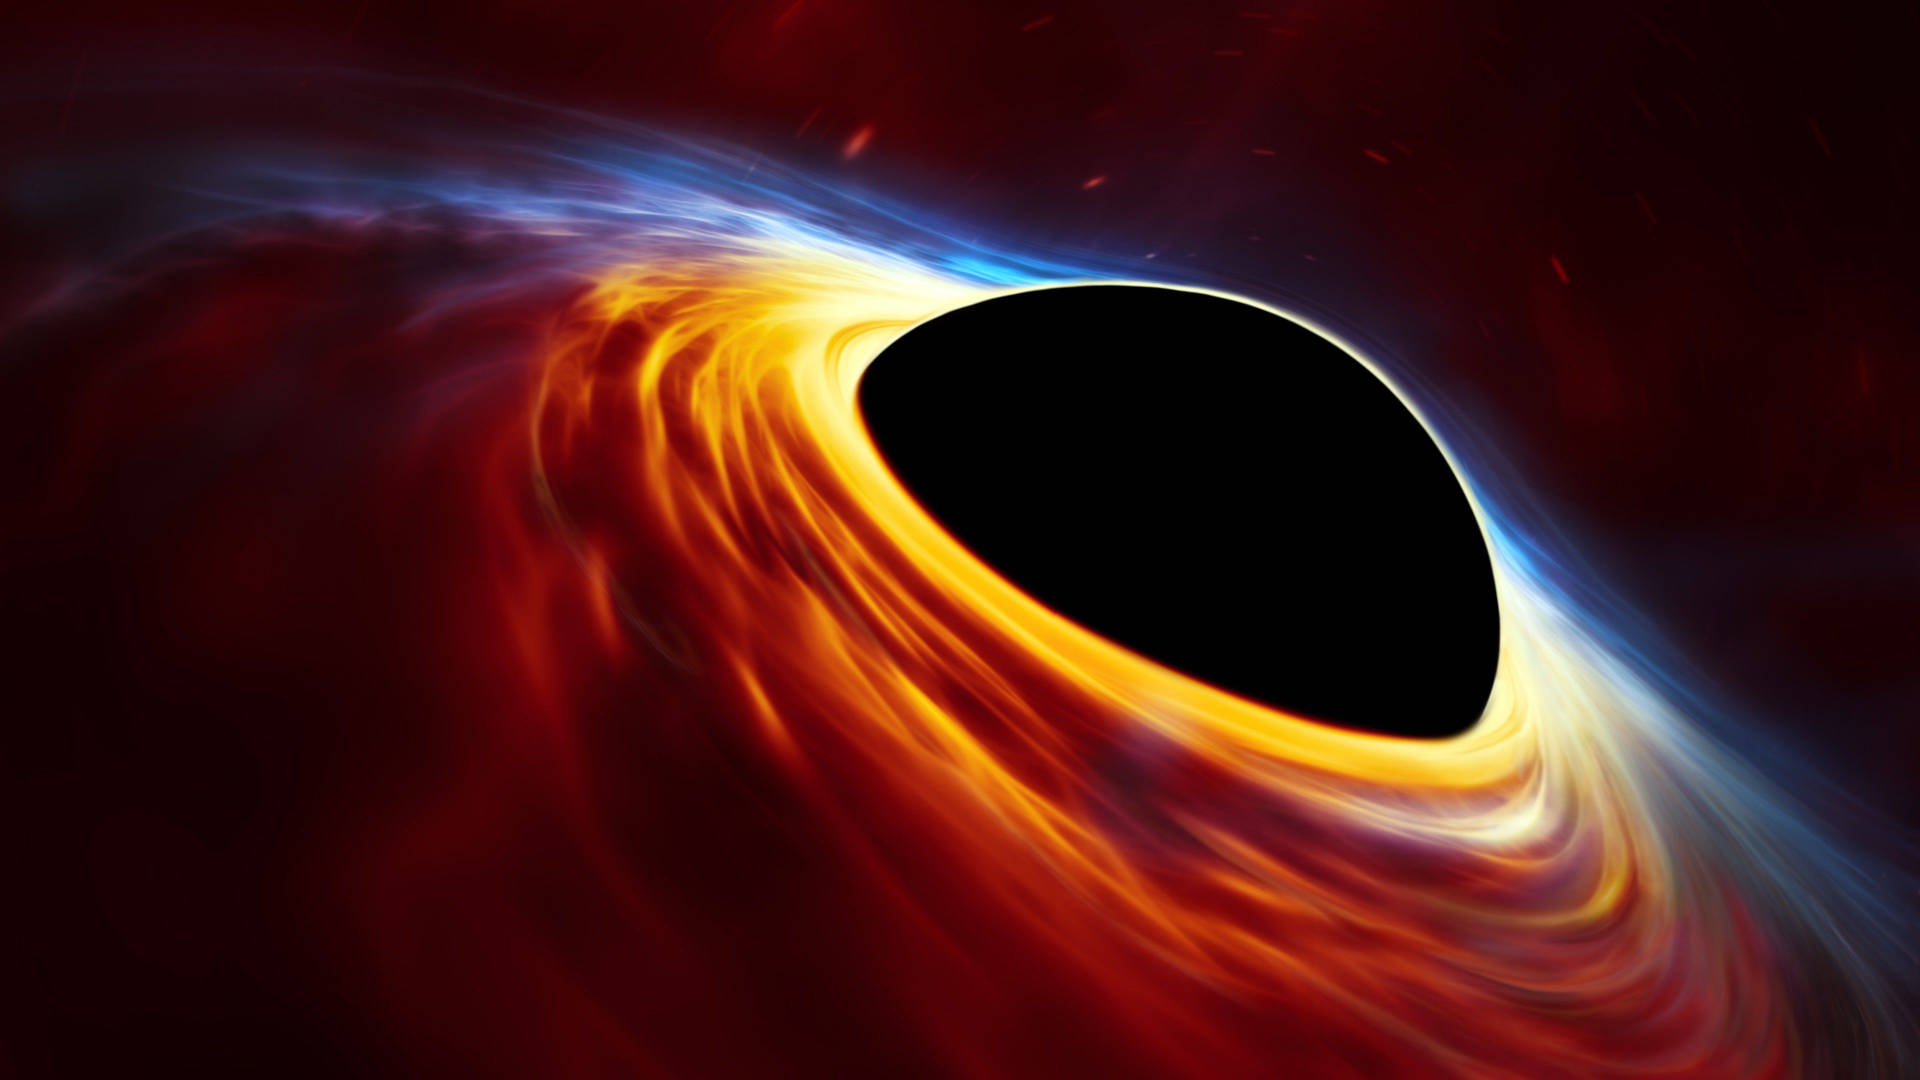 Black Hole With Blue And Red Flame Wallpaper